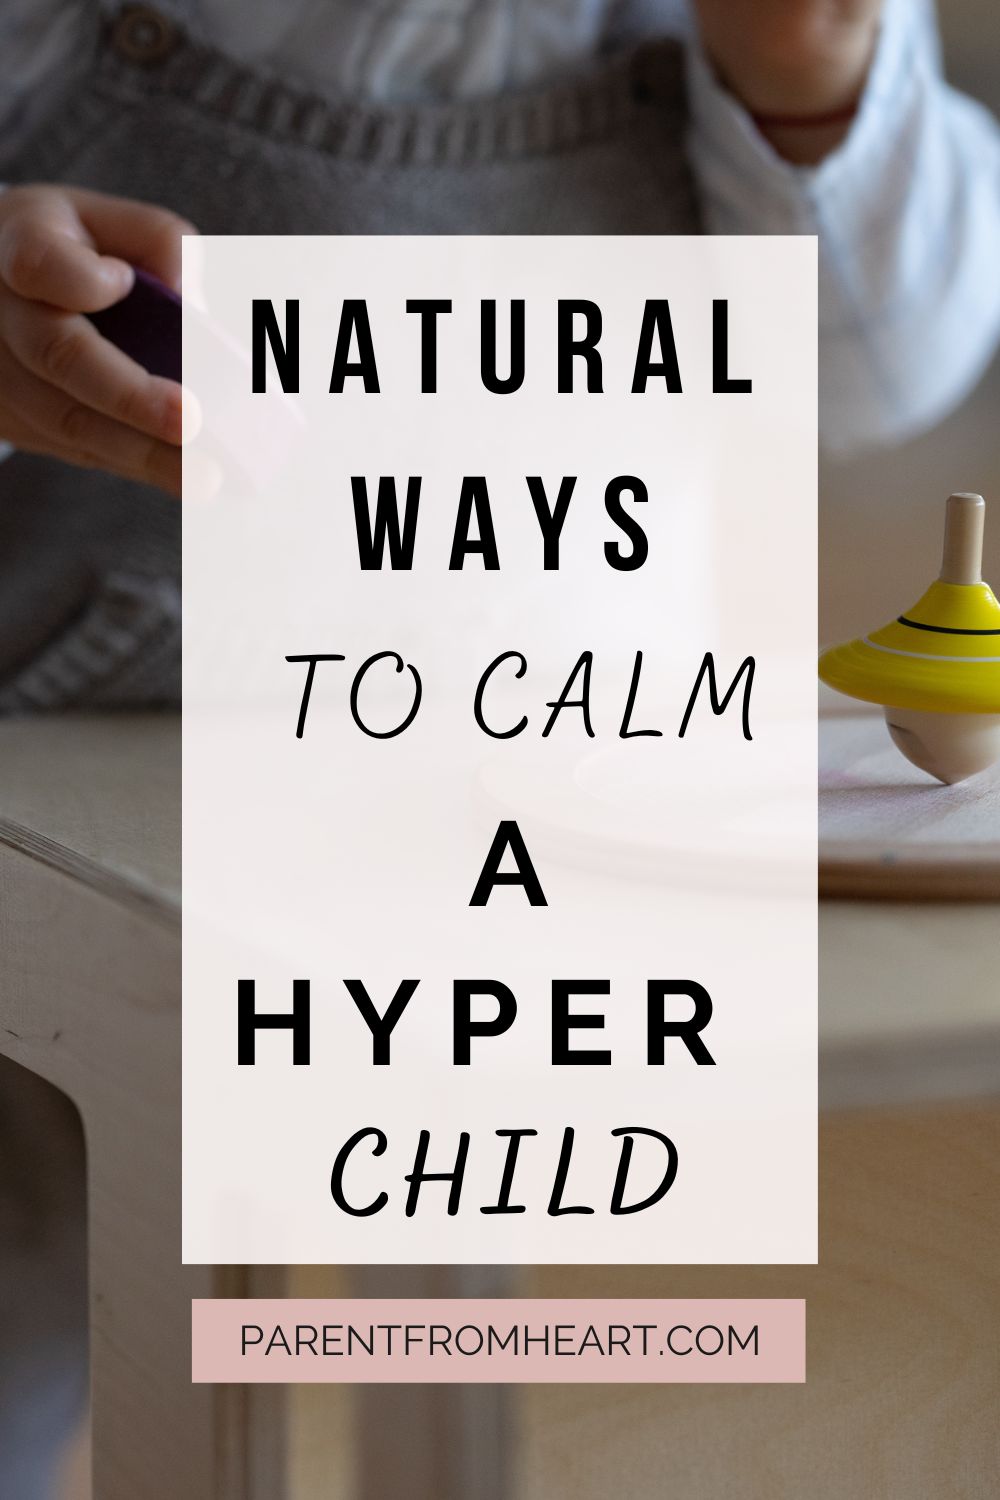 Natural ways to calm a hyper child cover photo